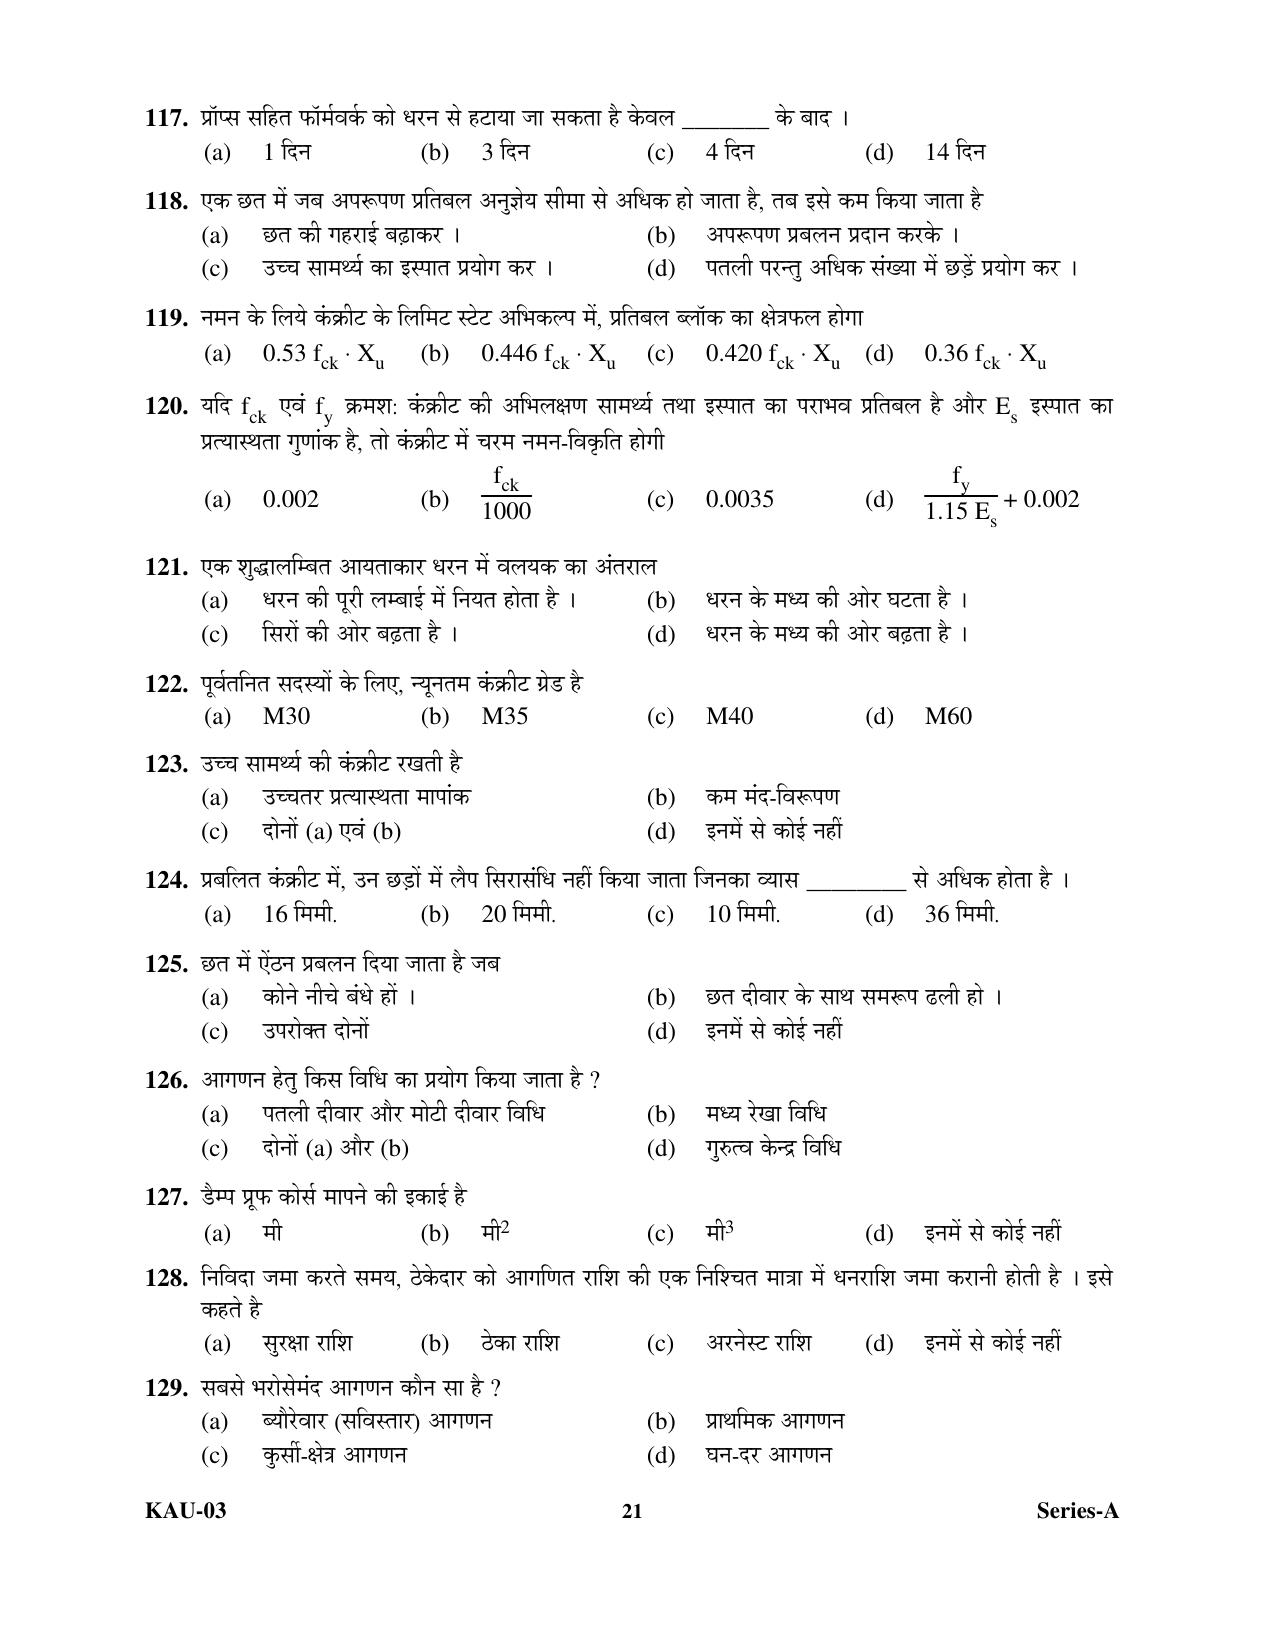 SEBI Officer Civil Engineering Previous Paper - Page 20